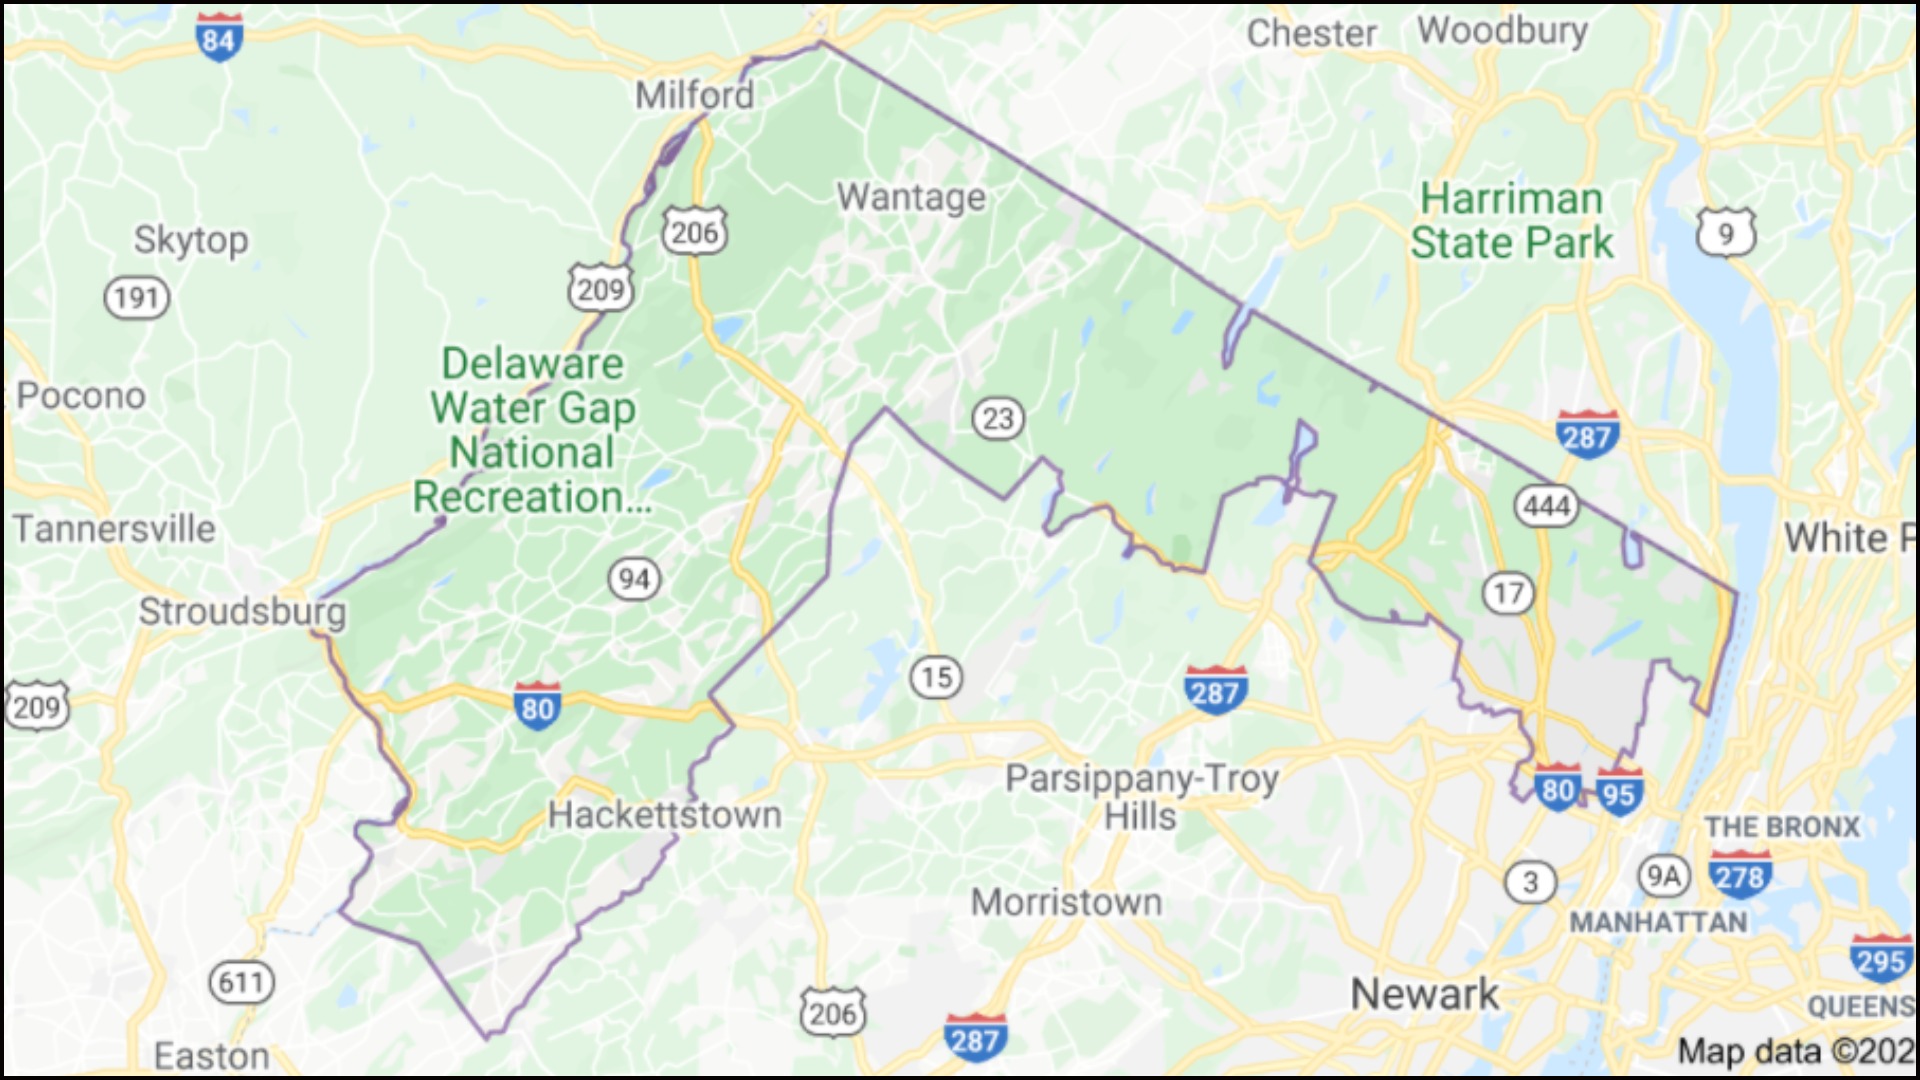 Outline of New Jersey's 5th Congressional District